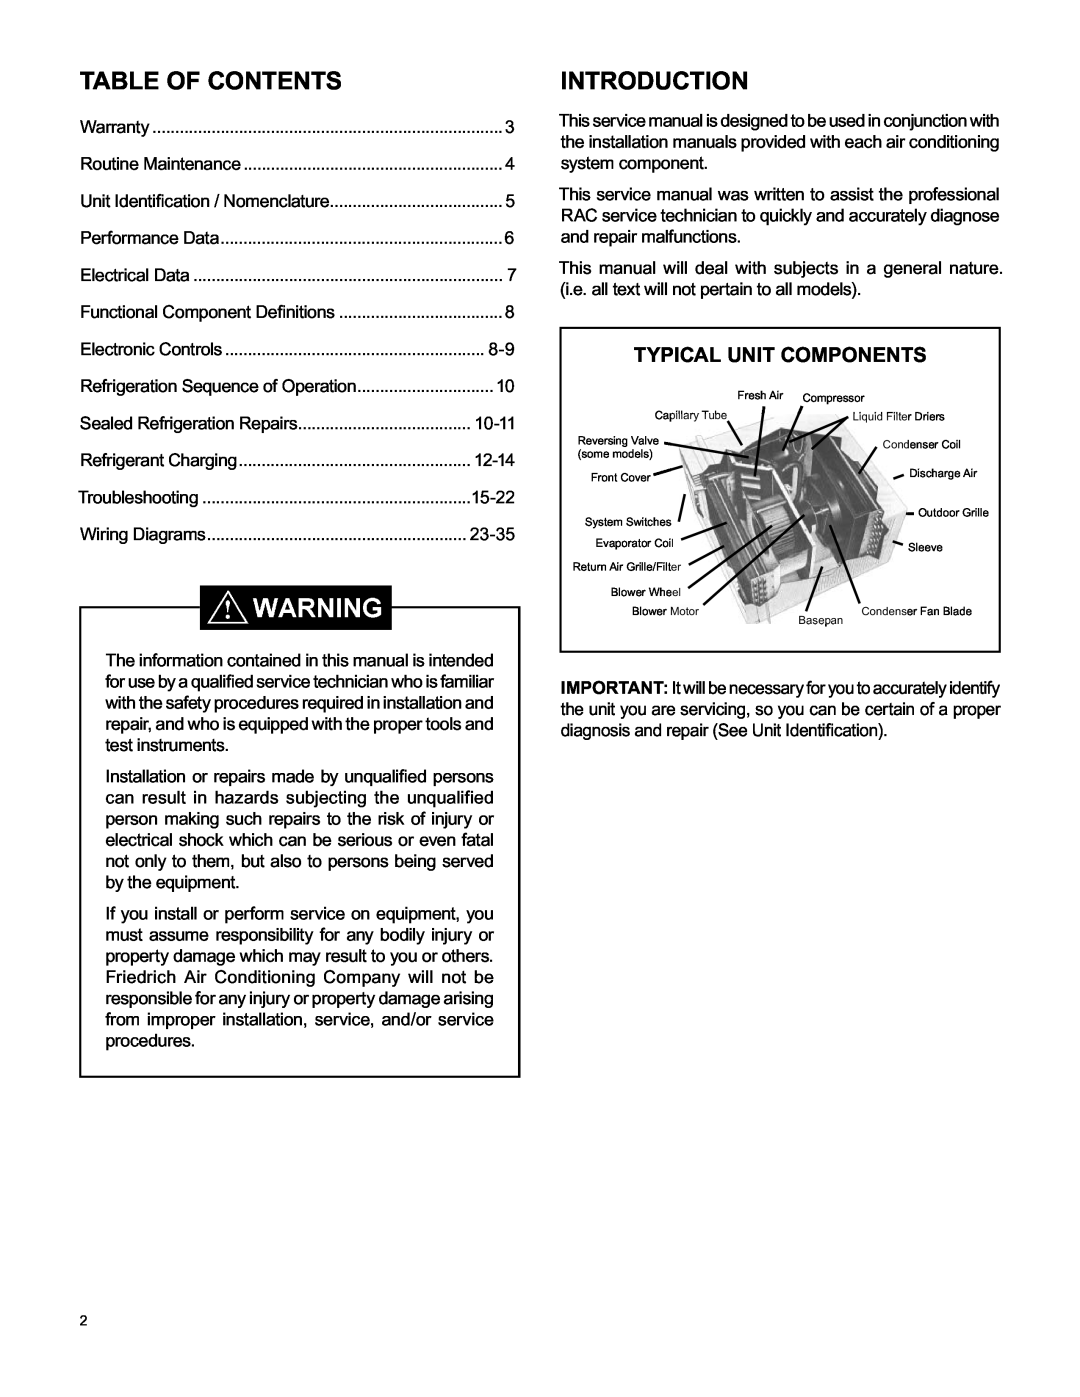 Friedrich RAC-SVC-06 service manual Table Of Contents, Introduction, Typical Unit Components 